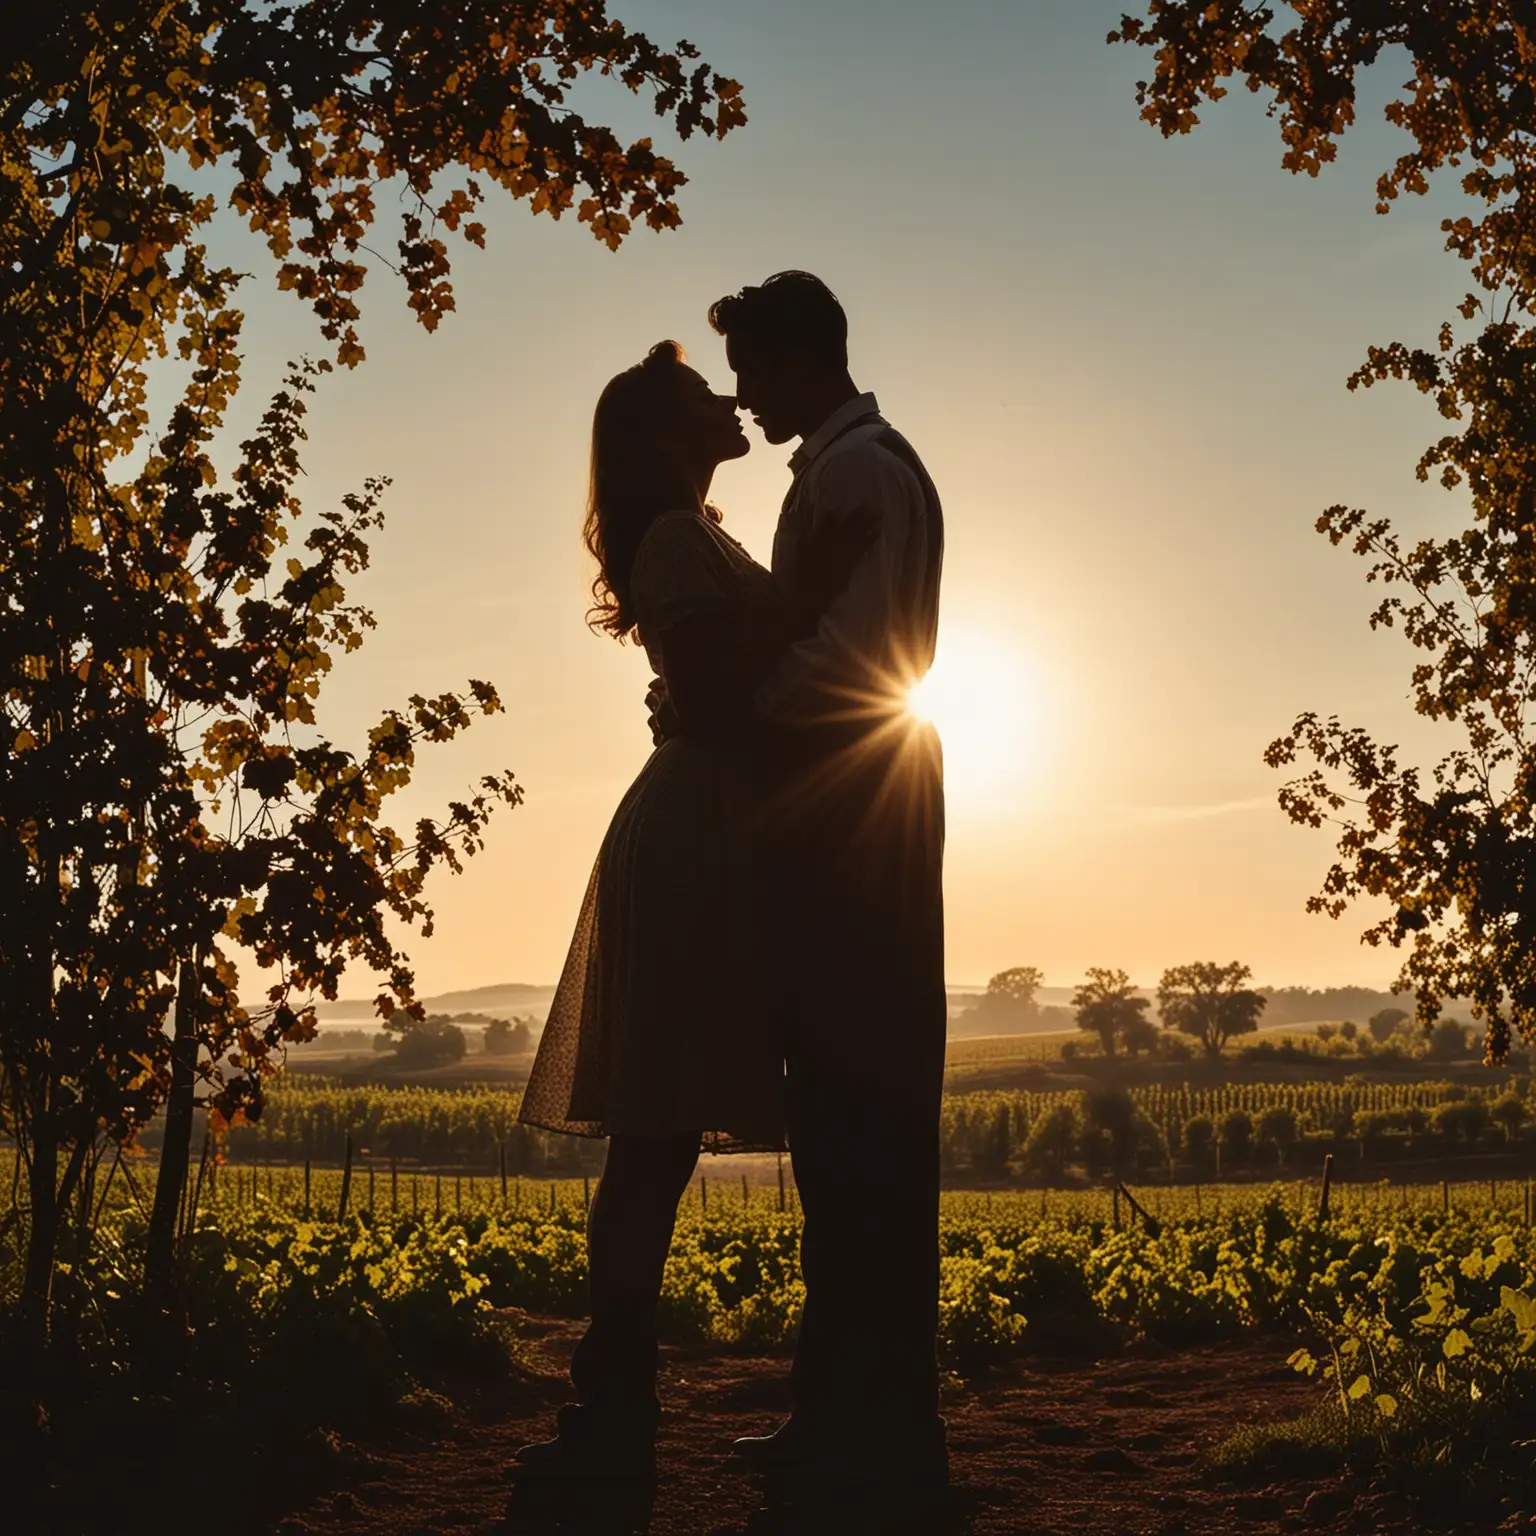 1940s couple kissing in nature. Silhouette of man in work clothes and woman in a dress together. Love and relationships concept. Dating concept. Background is a vineyard.
